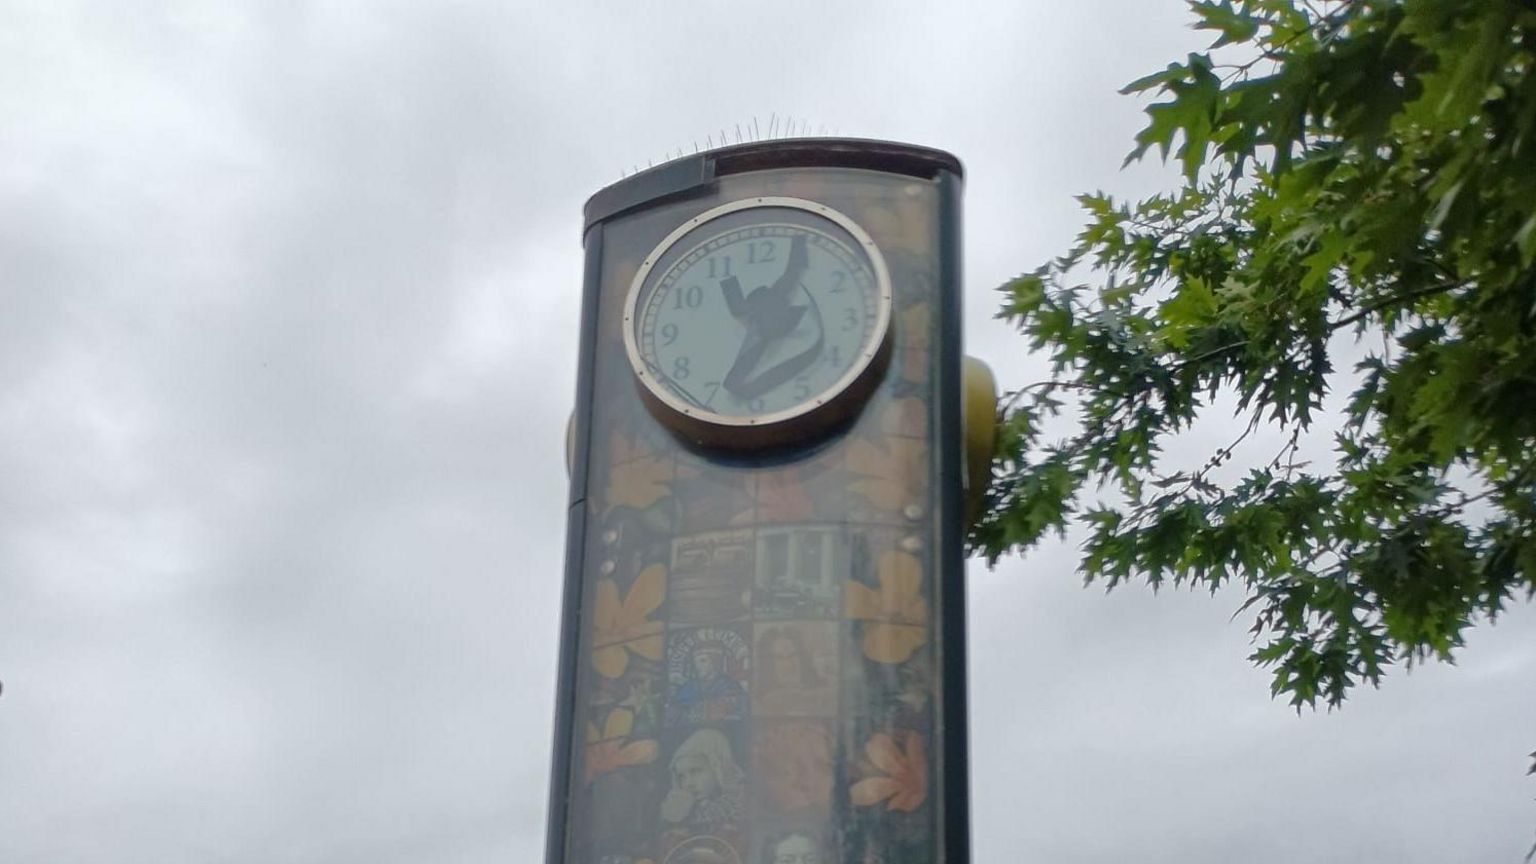 Image of The Keynsham Clock. It is a tower, with many small, square images on its base. The clock face is covered in a thick, black material. One of the clock hands can be seen broken off and lying across the edge of the clock, between the numbers 7 and 9. 